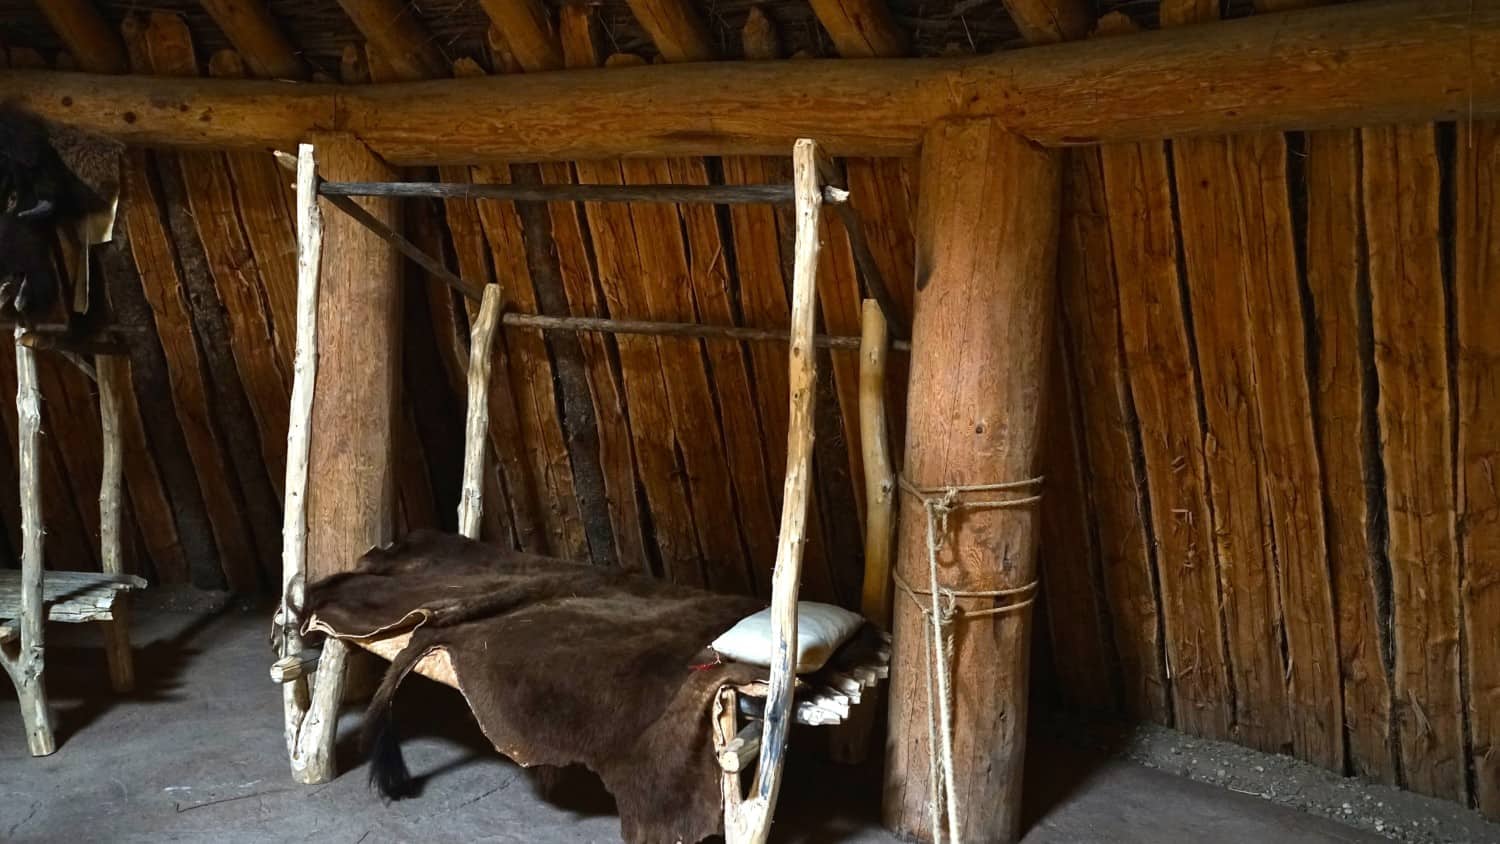 North Dakota's Top Pet Friendly Attraction: Knife River Indian Villages | GoPetFriendly.com